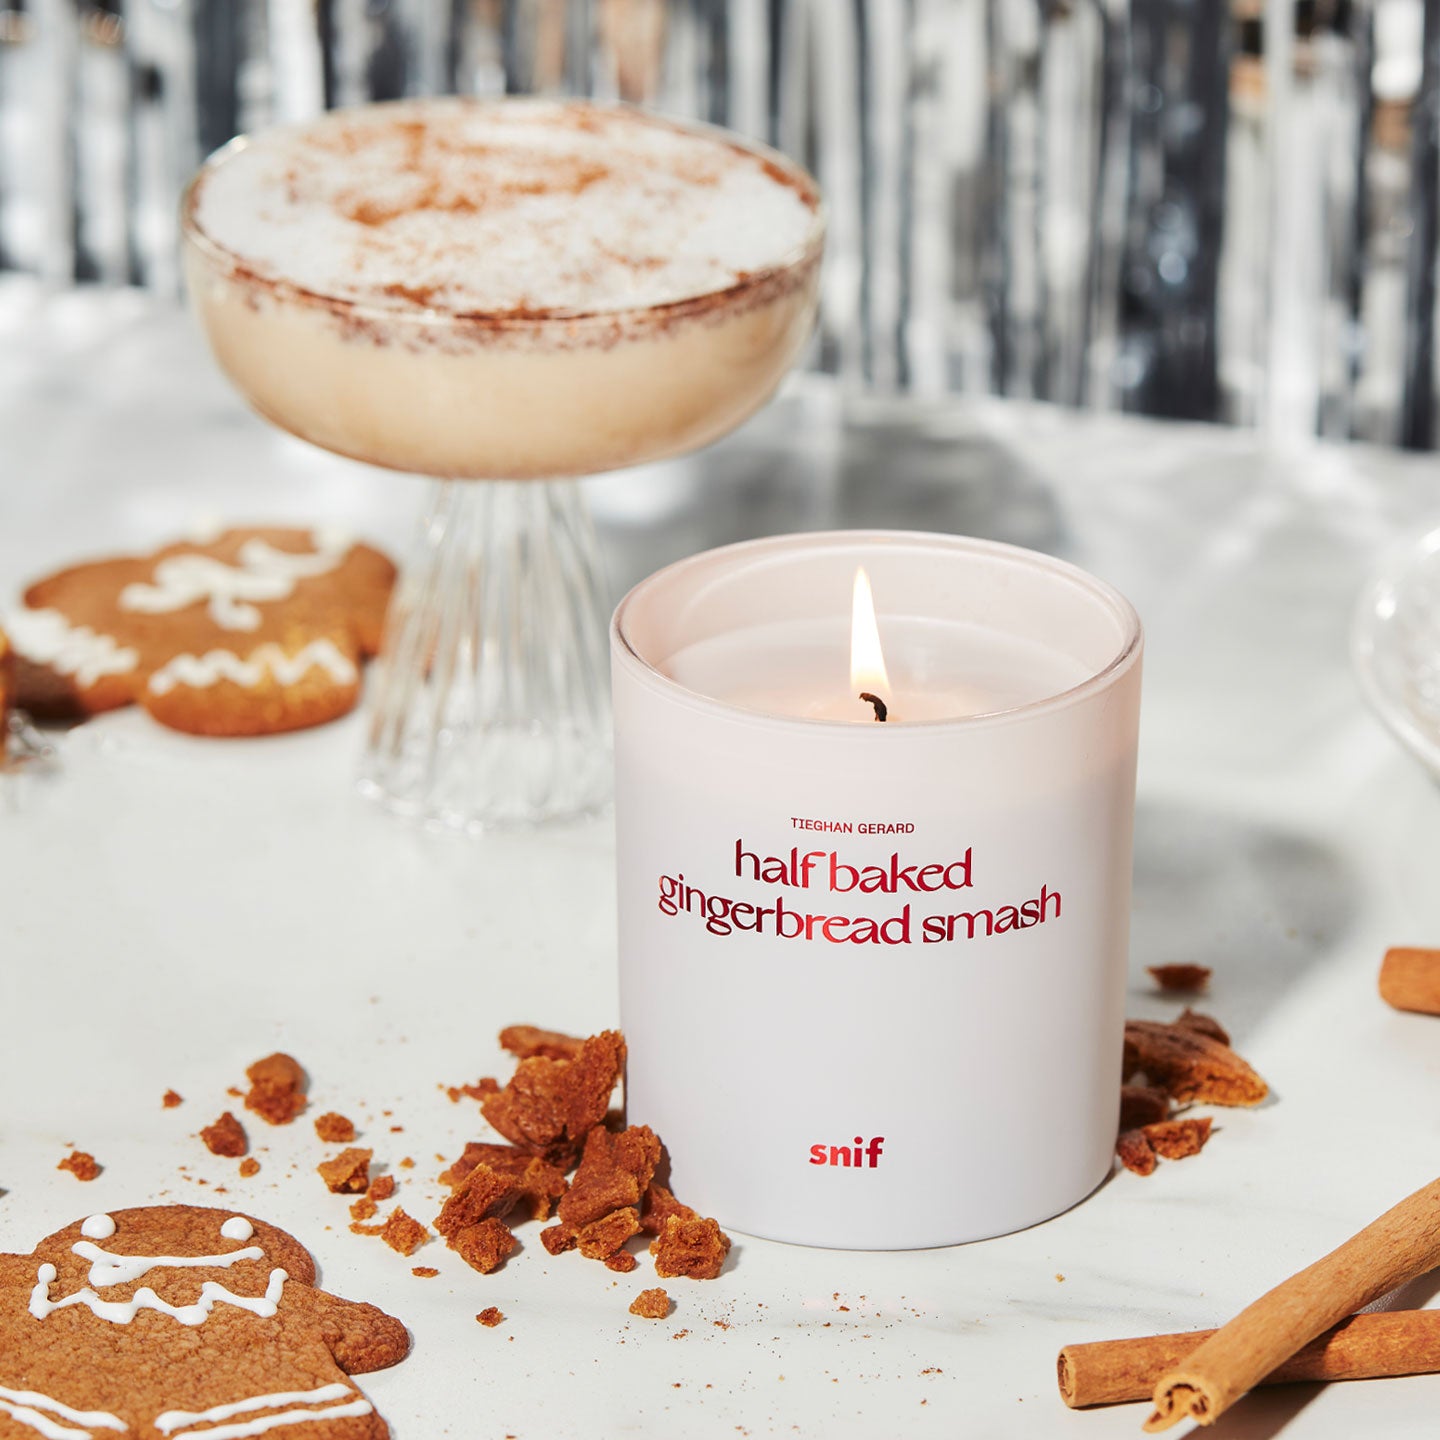 Festive Feeling: Make Your Own - Scented Candle Kit, gingerbread